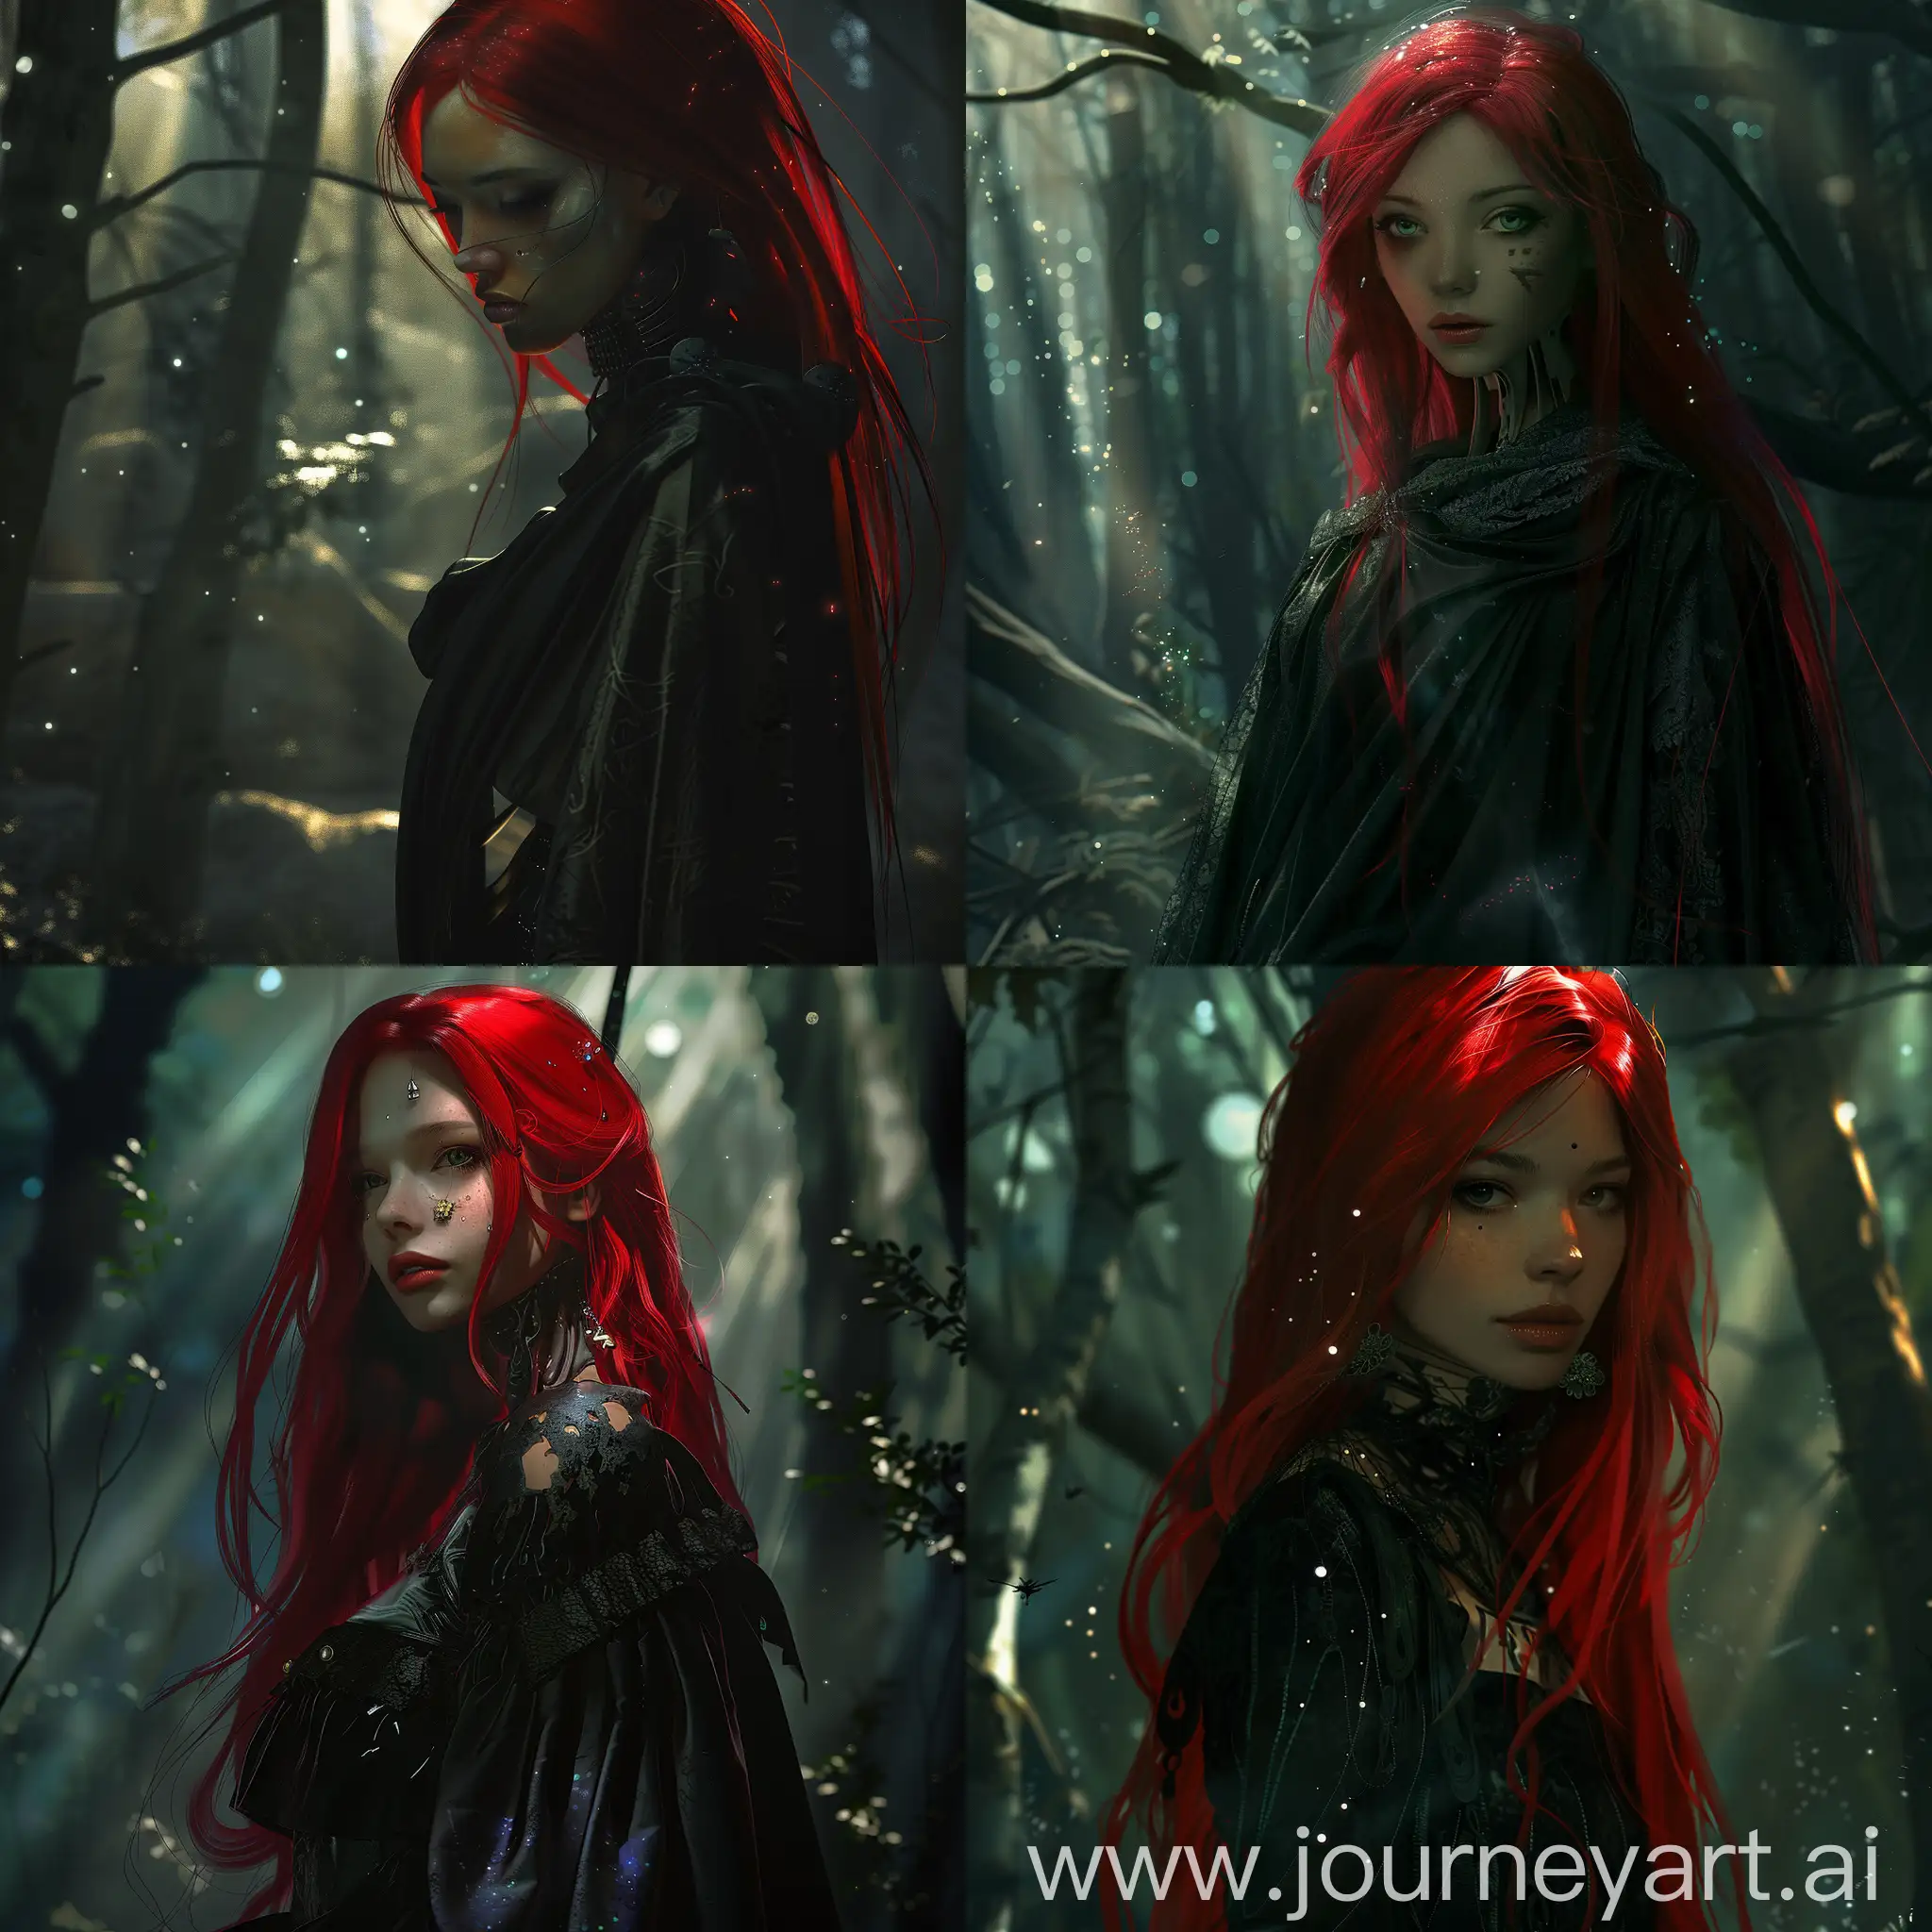 Enigmatic-RedHaired-Android-Woman-in-Moonlit-Forest